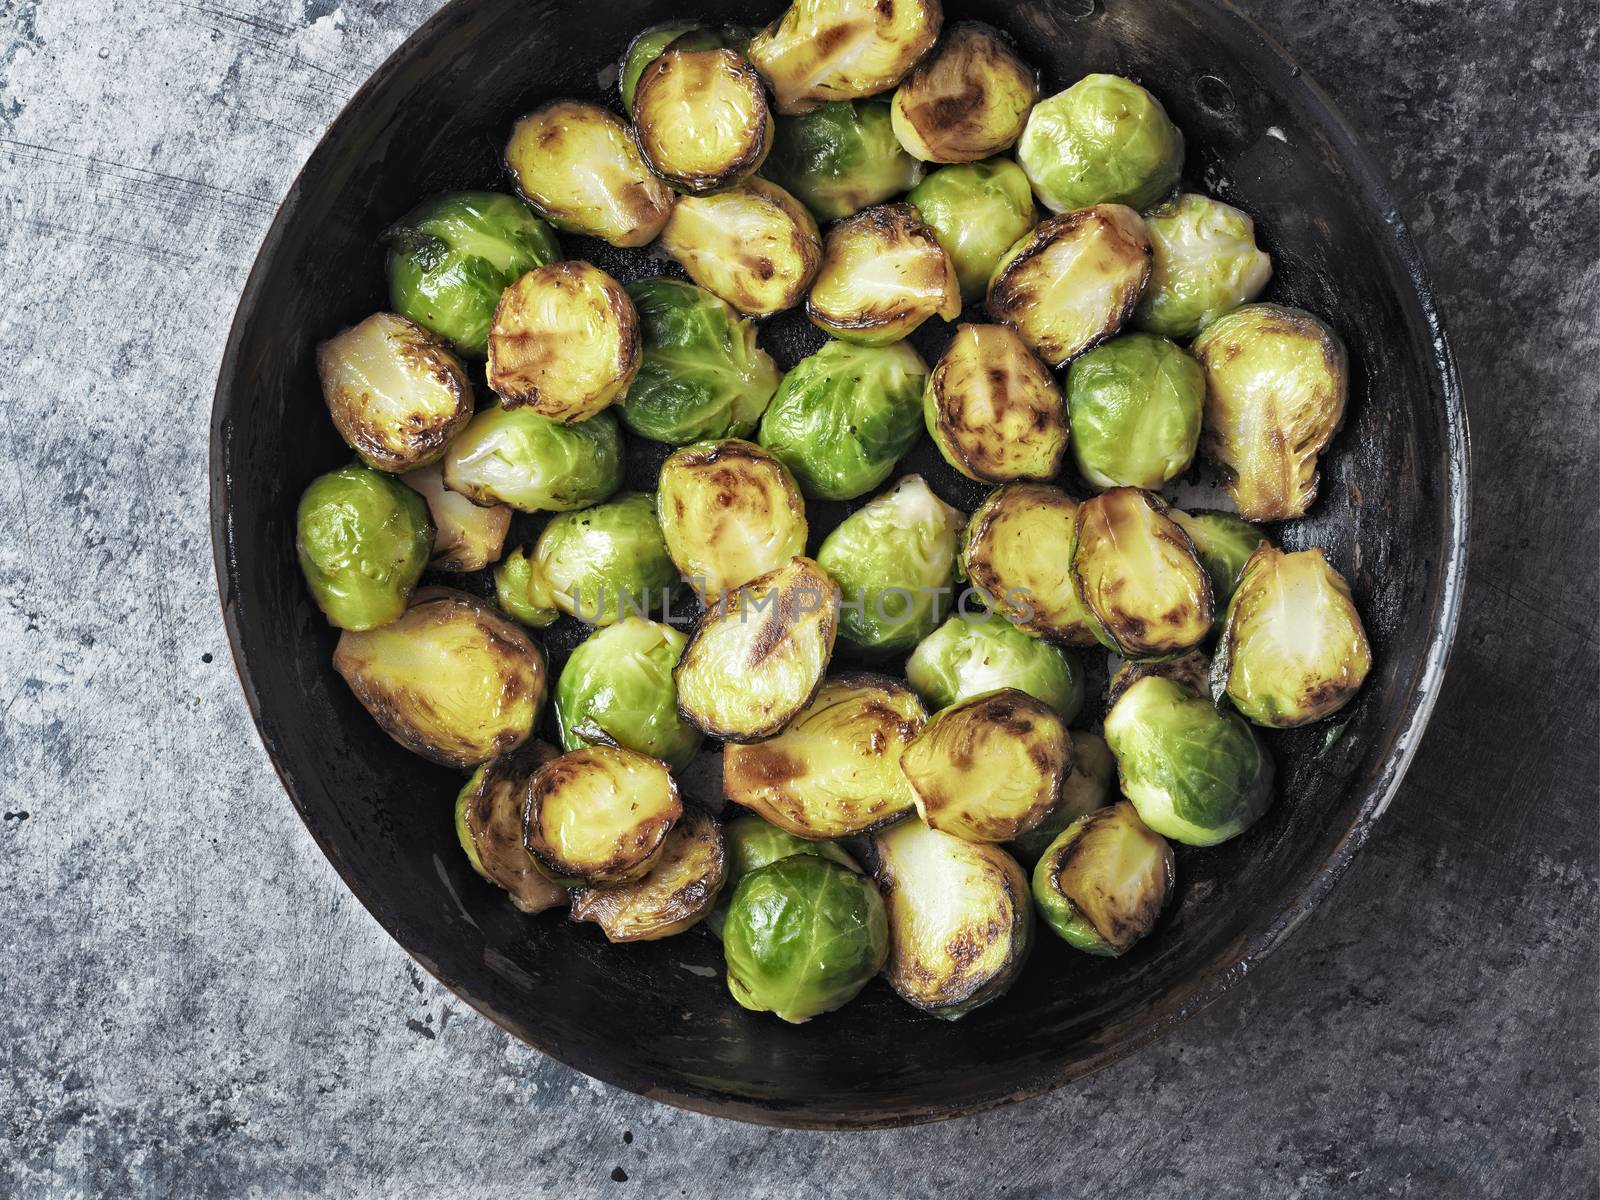 rustic crispy fried brussels sprouts by zkruger